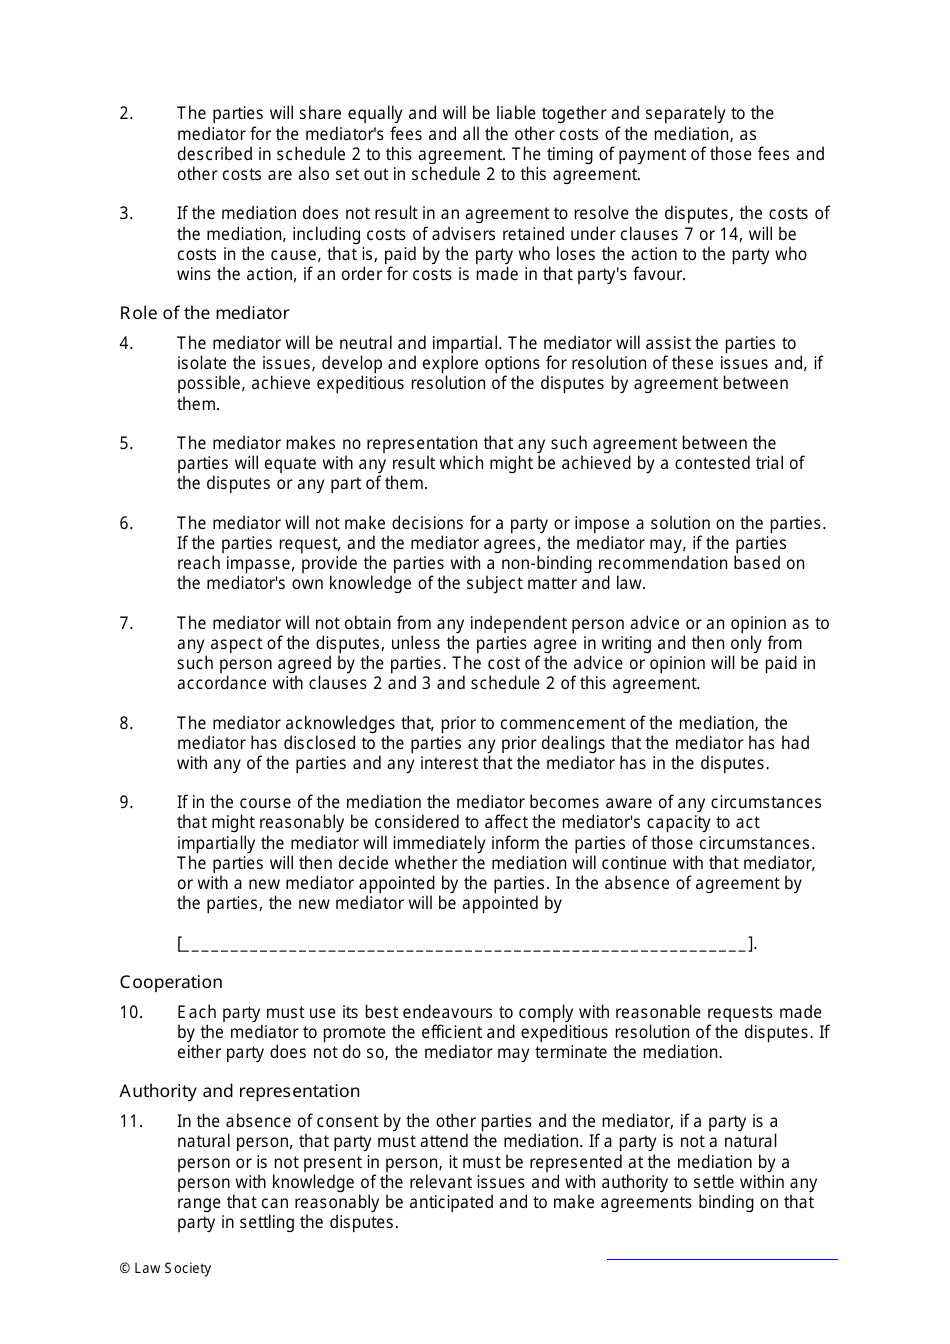 Sample Mediation Agreement Template Law Society Fill Out, Sign